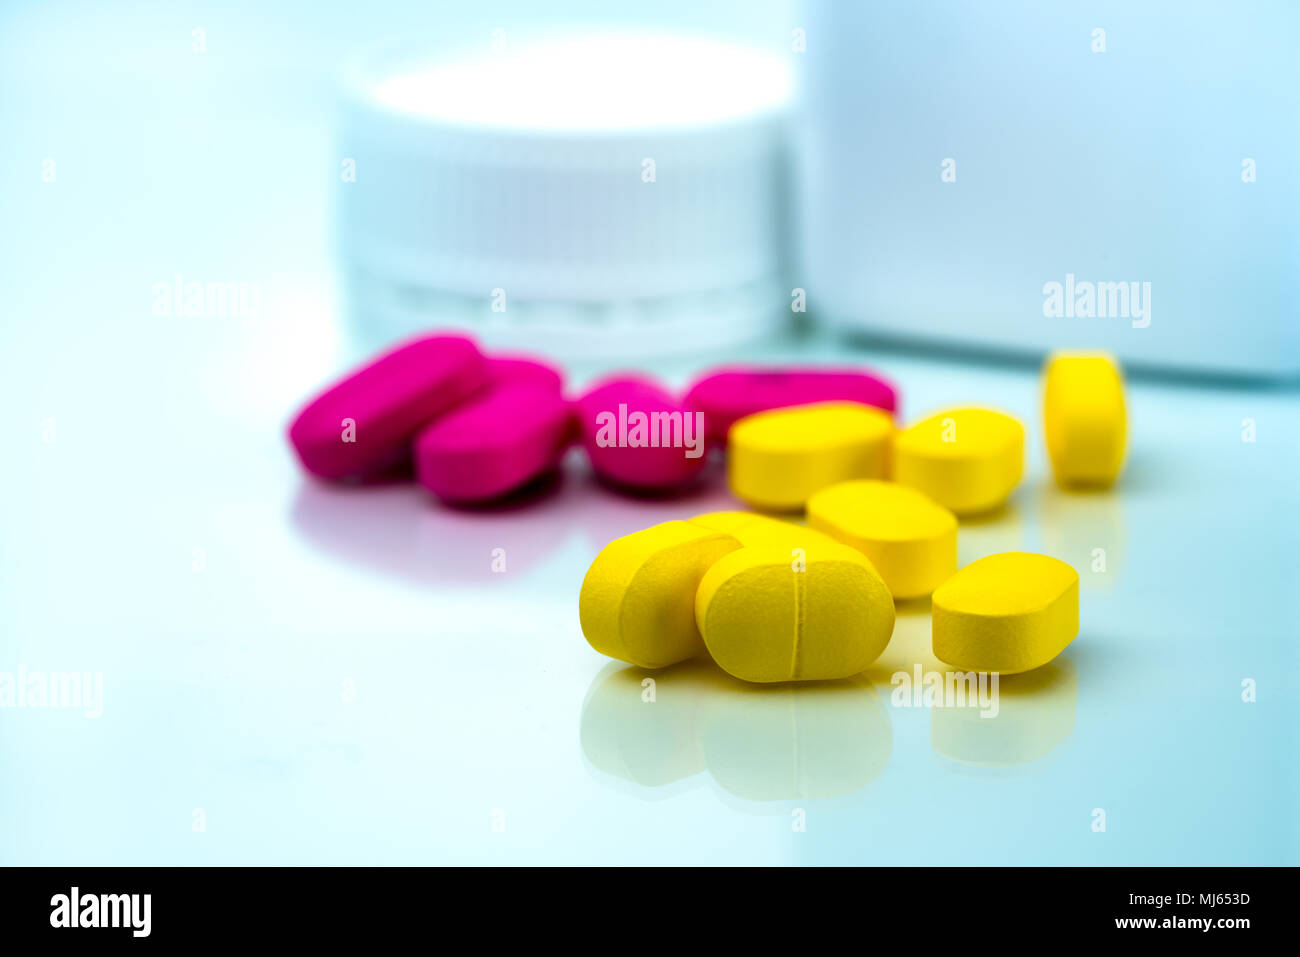 Download Pile Of Yellow And Pink Tablets Pills On Blurred Background Of Plastic Pills Bottle With Copy Space Ibuprofen For Relief Pain Pharmaceutical Industr Stock Photo Alamy Yellowimages Mockups